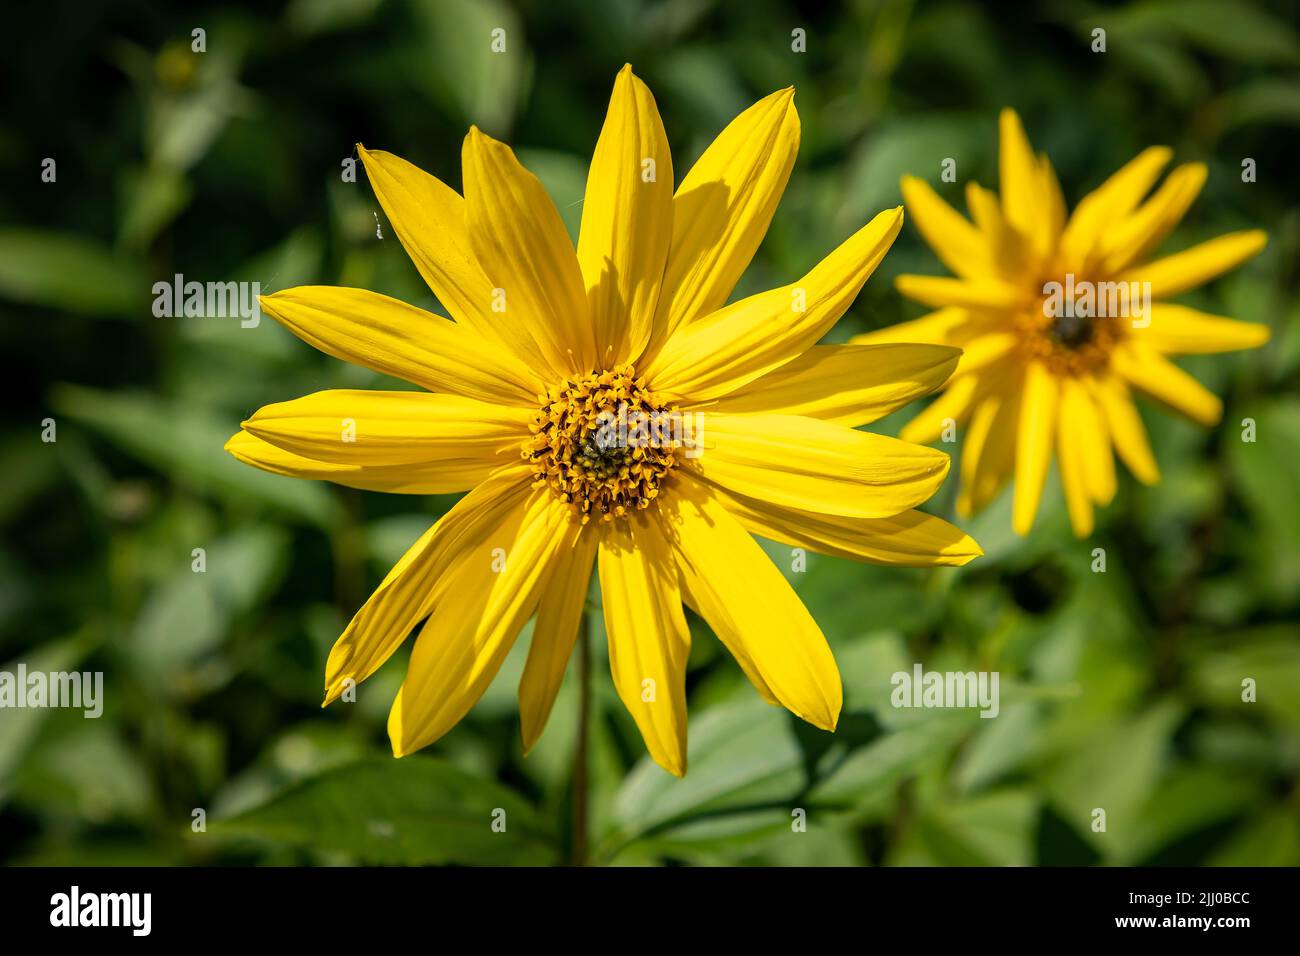 Two yellow flowers in an English country garden Stock Photo